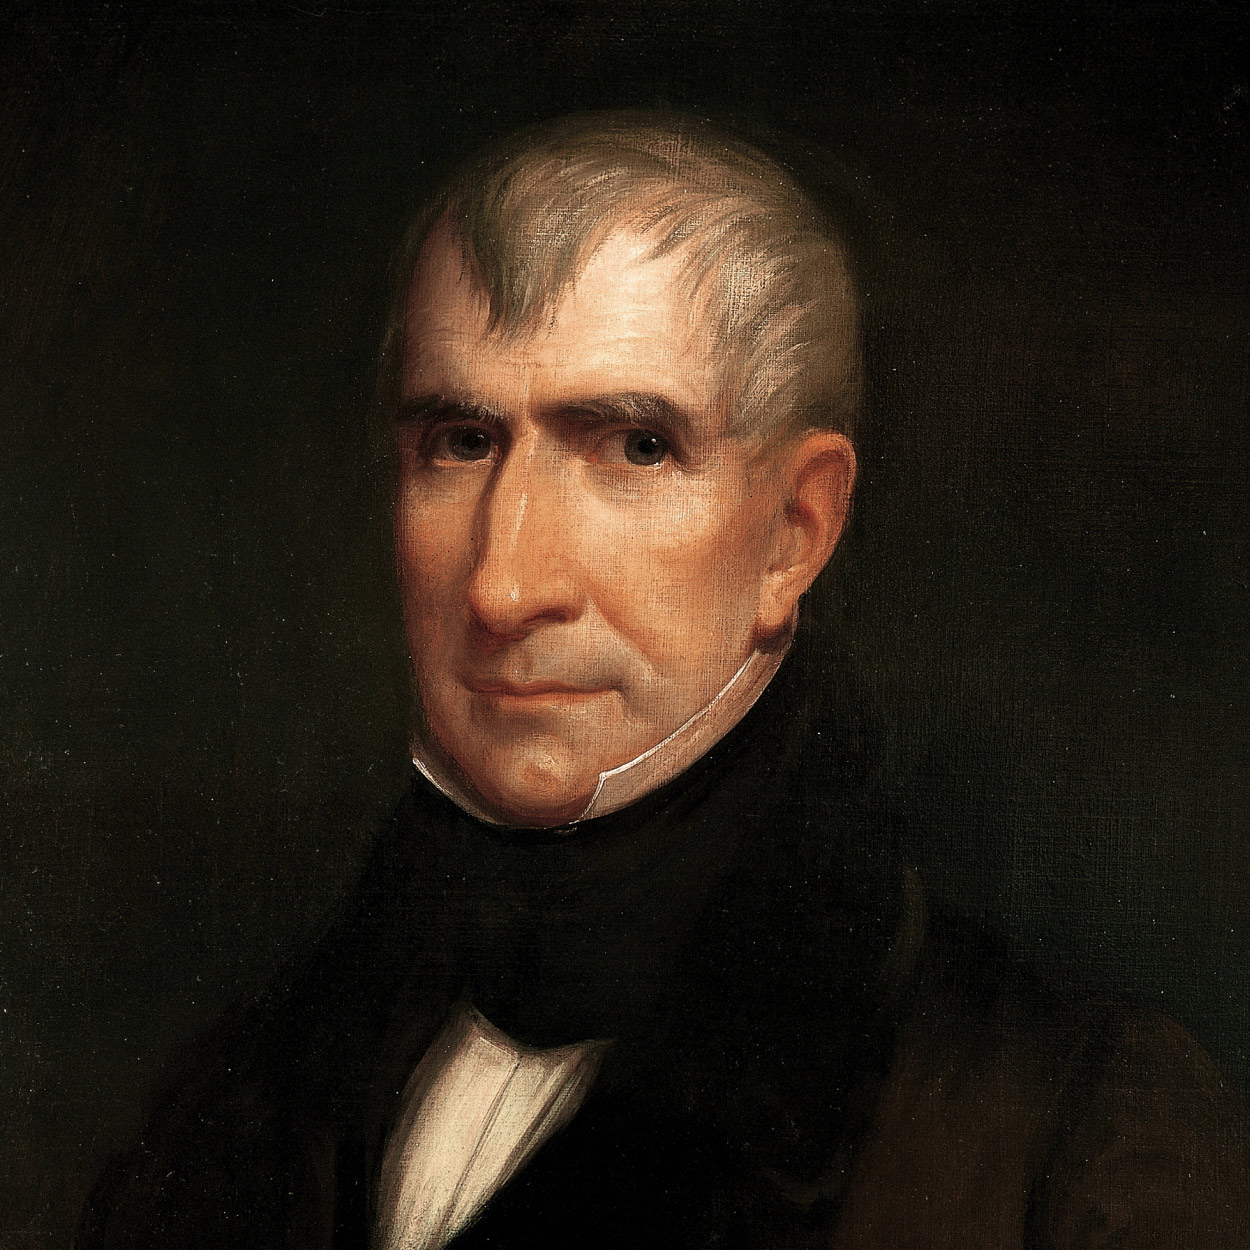 Portrait of William Henry Harrison, the 9th President of the United States